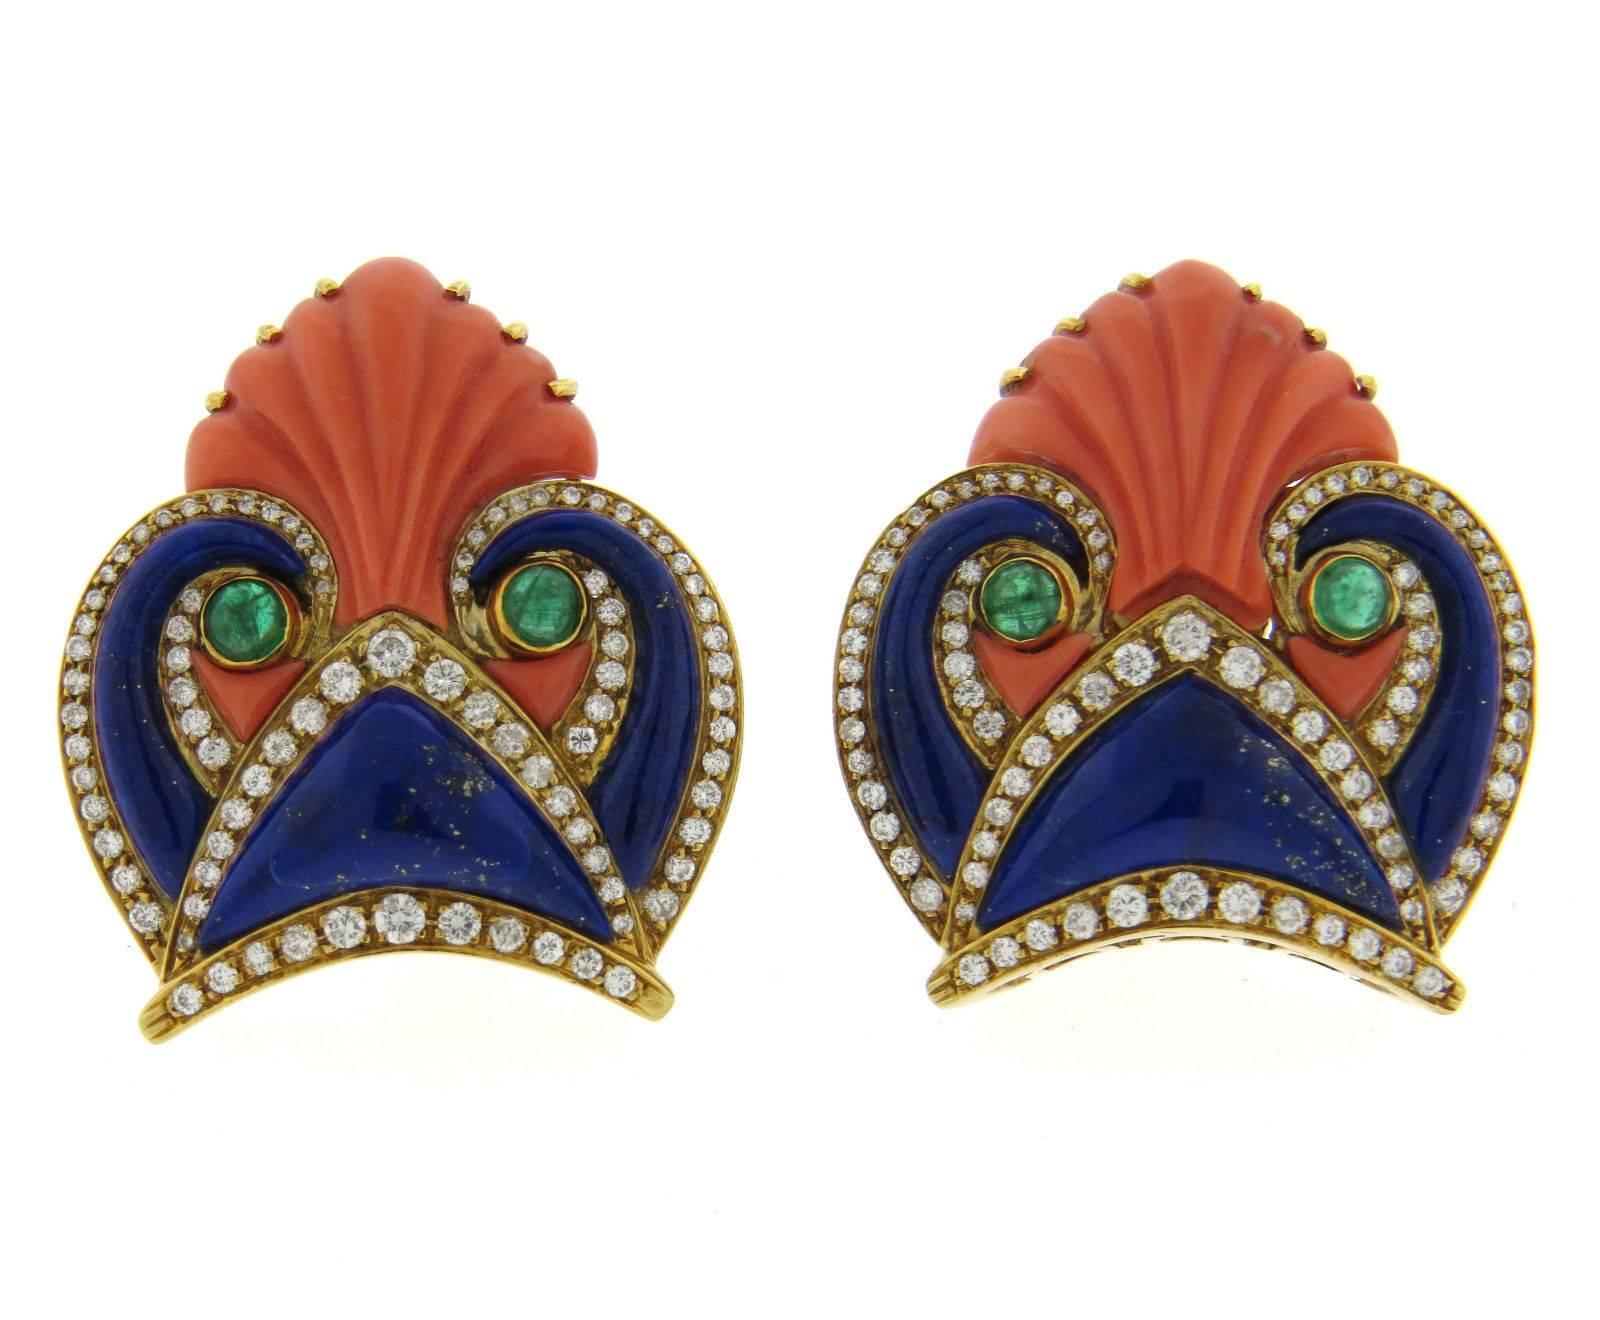 An circa 1980s 18k yellow gold earrings and bracelet set  with diamonds, carved coral, lapis and emerald cabochons. Bracelet will fit up to 7 1/4